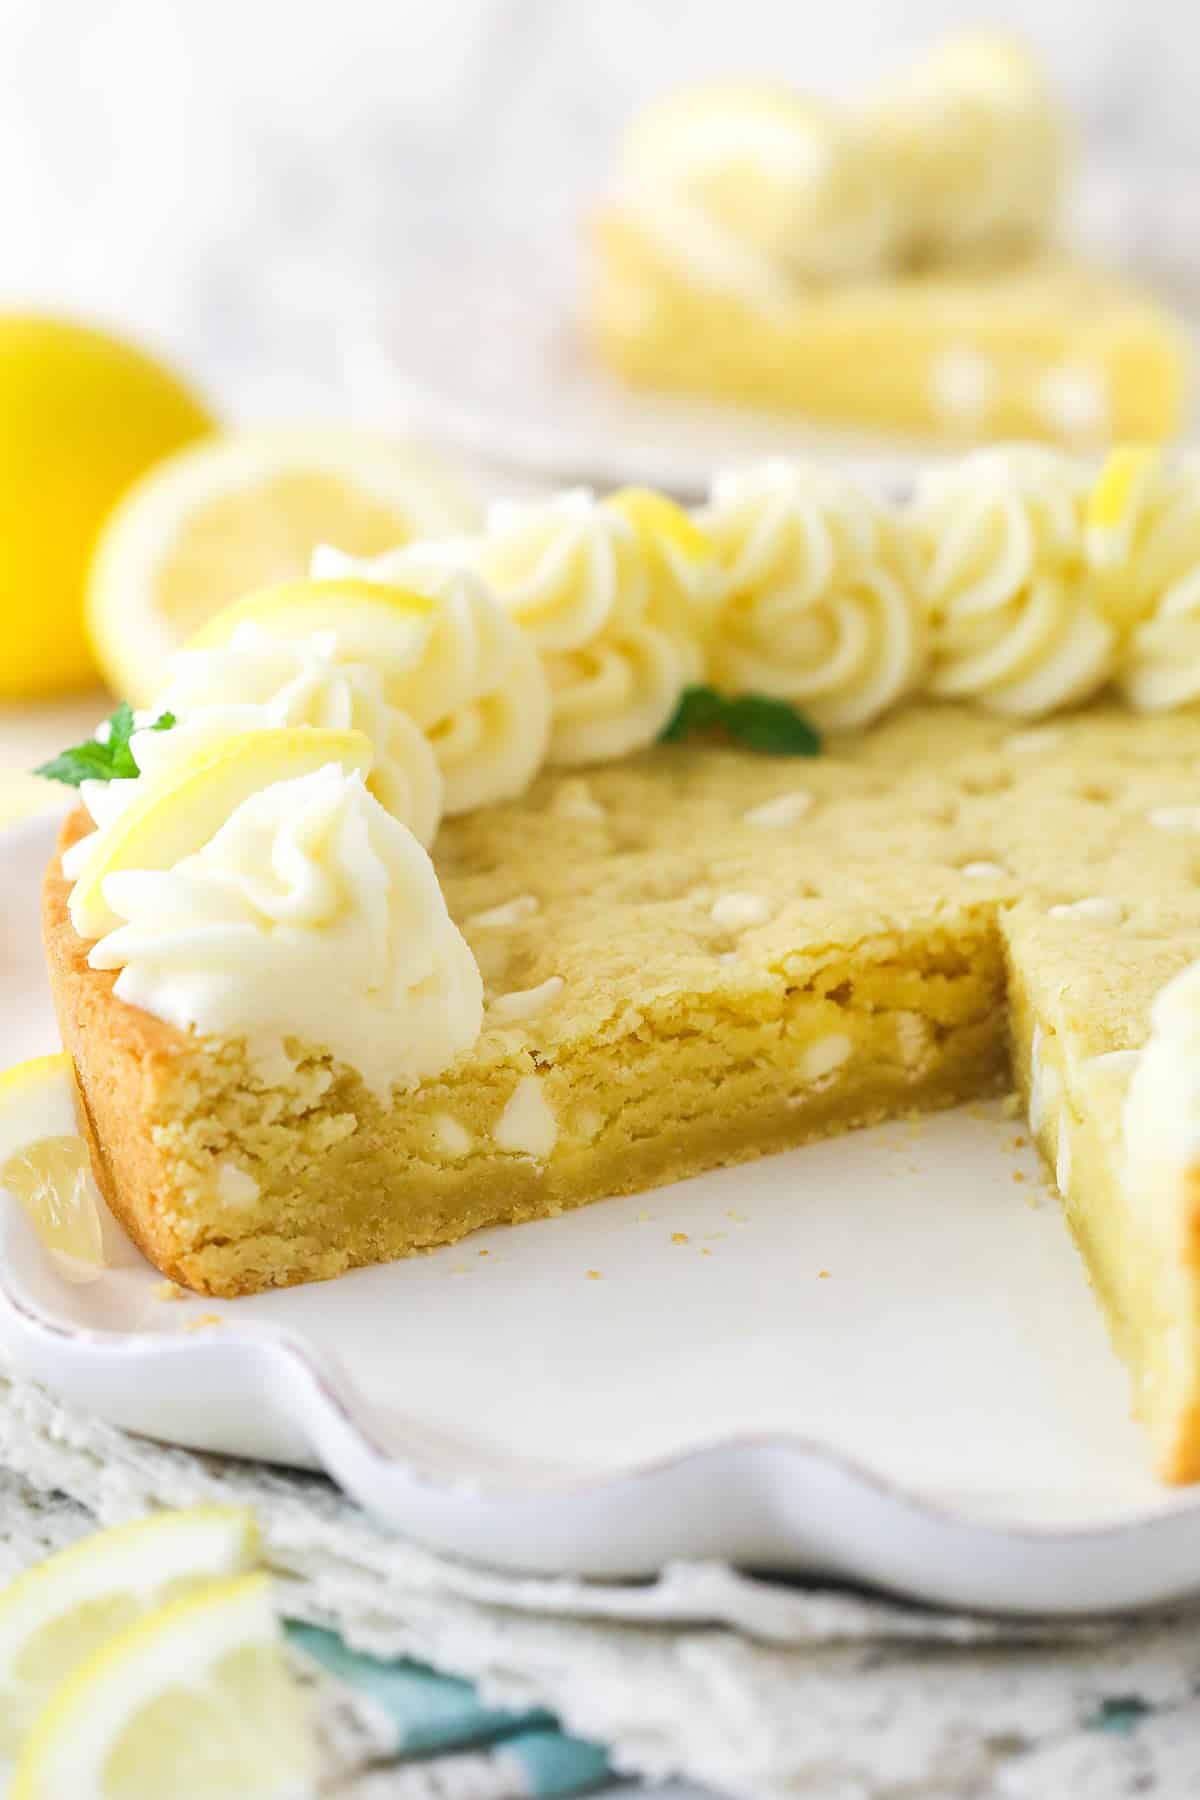 Lemon cookie cake with a slice taken out of it.